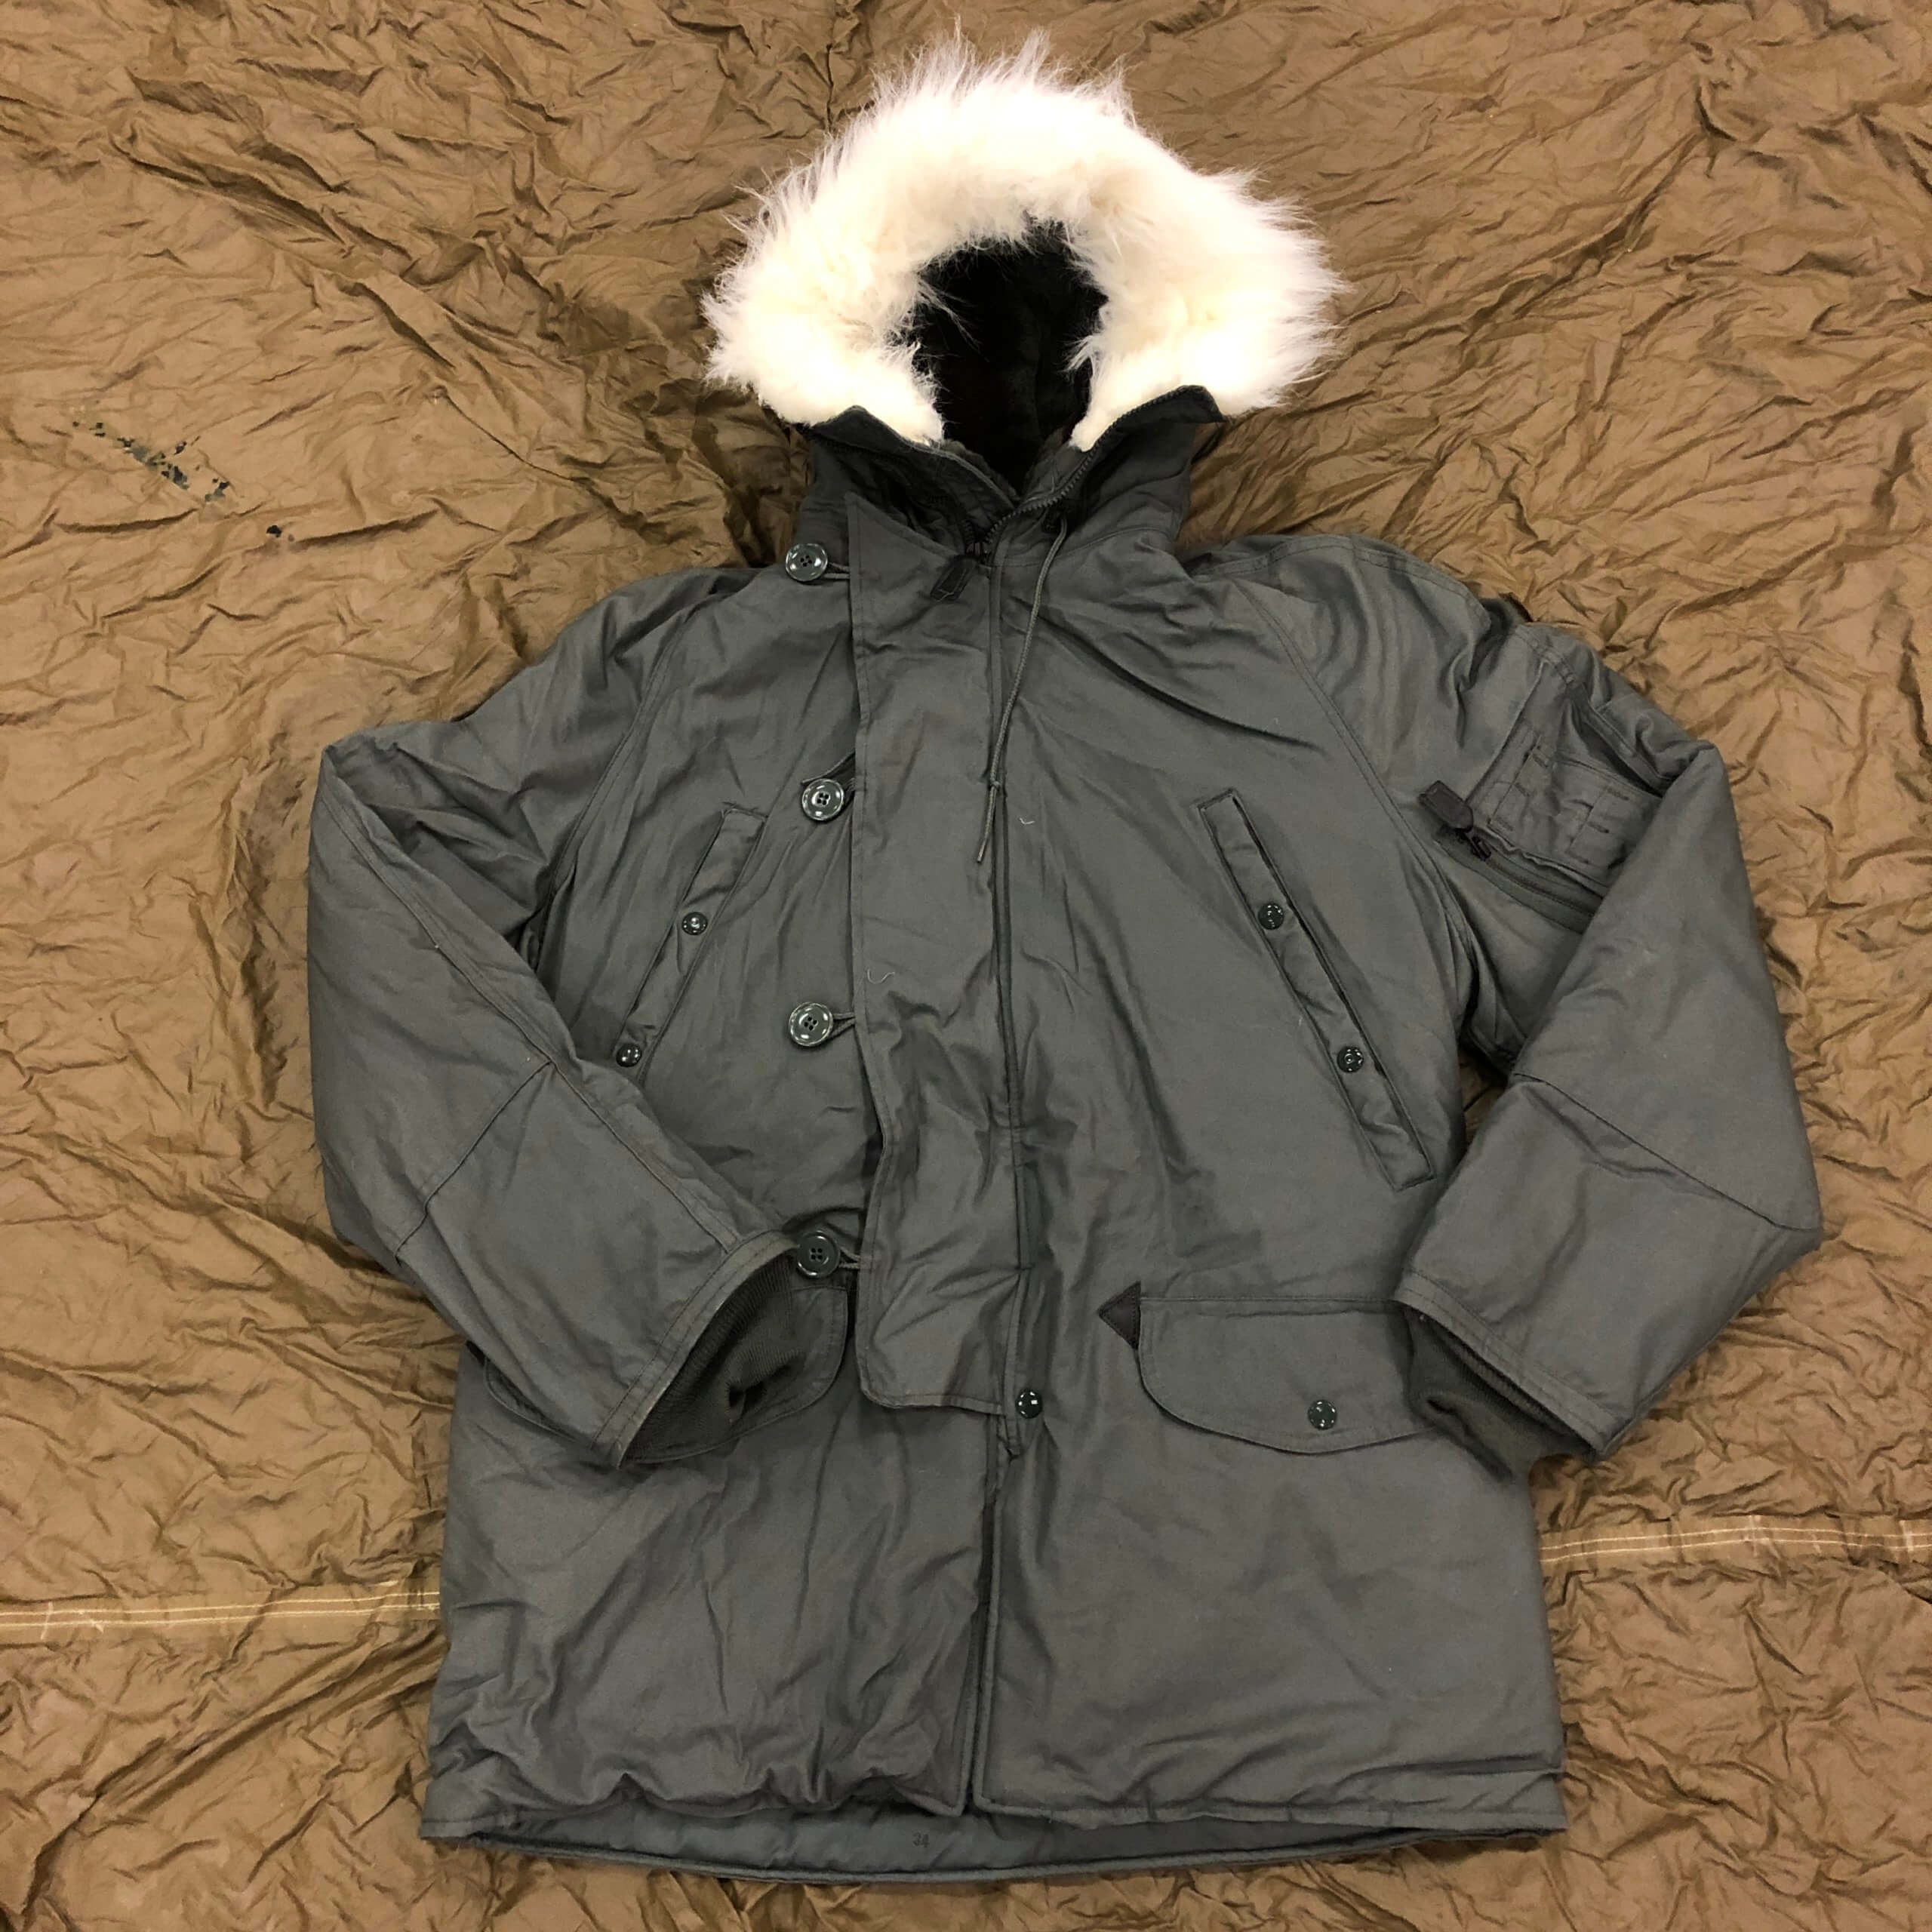 New Military 100% Genuine Army Cold Weather Winter Parka & Fleece Liner All Size 